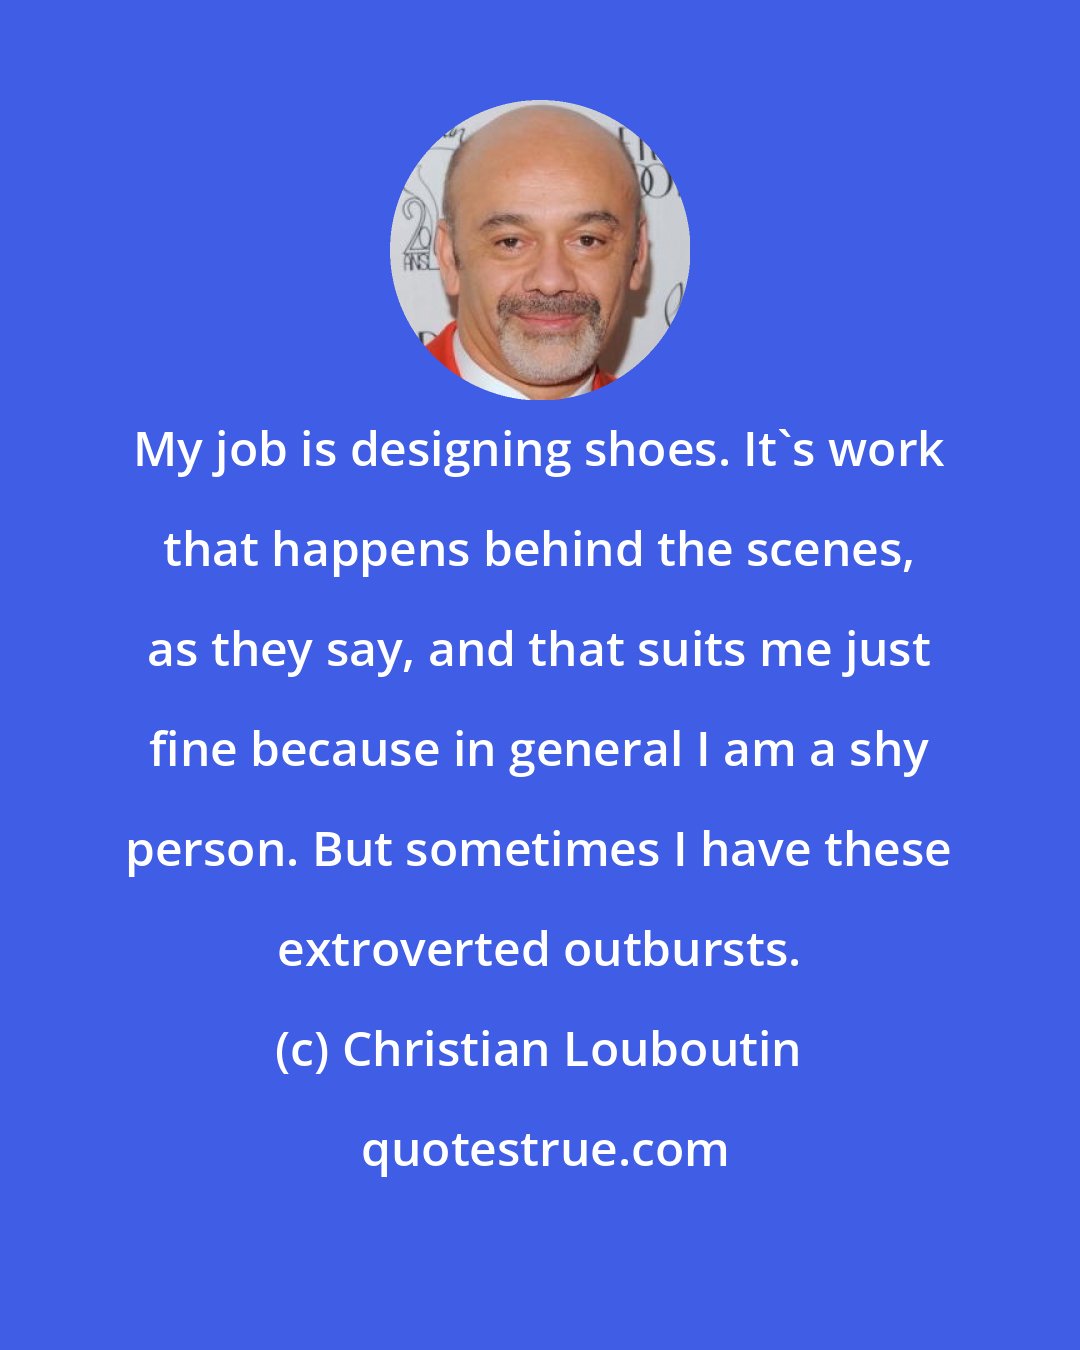 Christian Louboutin: My job is designing shoes. It's work that happens behind the scenes, as they say, and that suits me just fine because in general I am a shy person. But sometimes I have these extroverted outbursts.